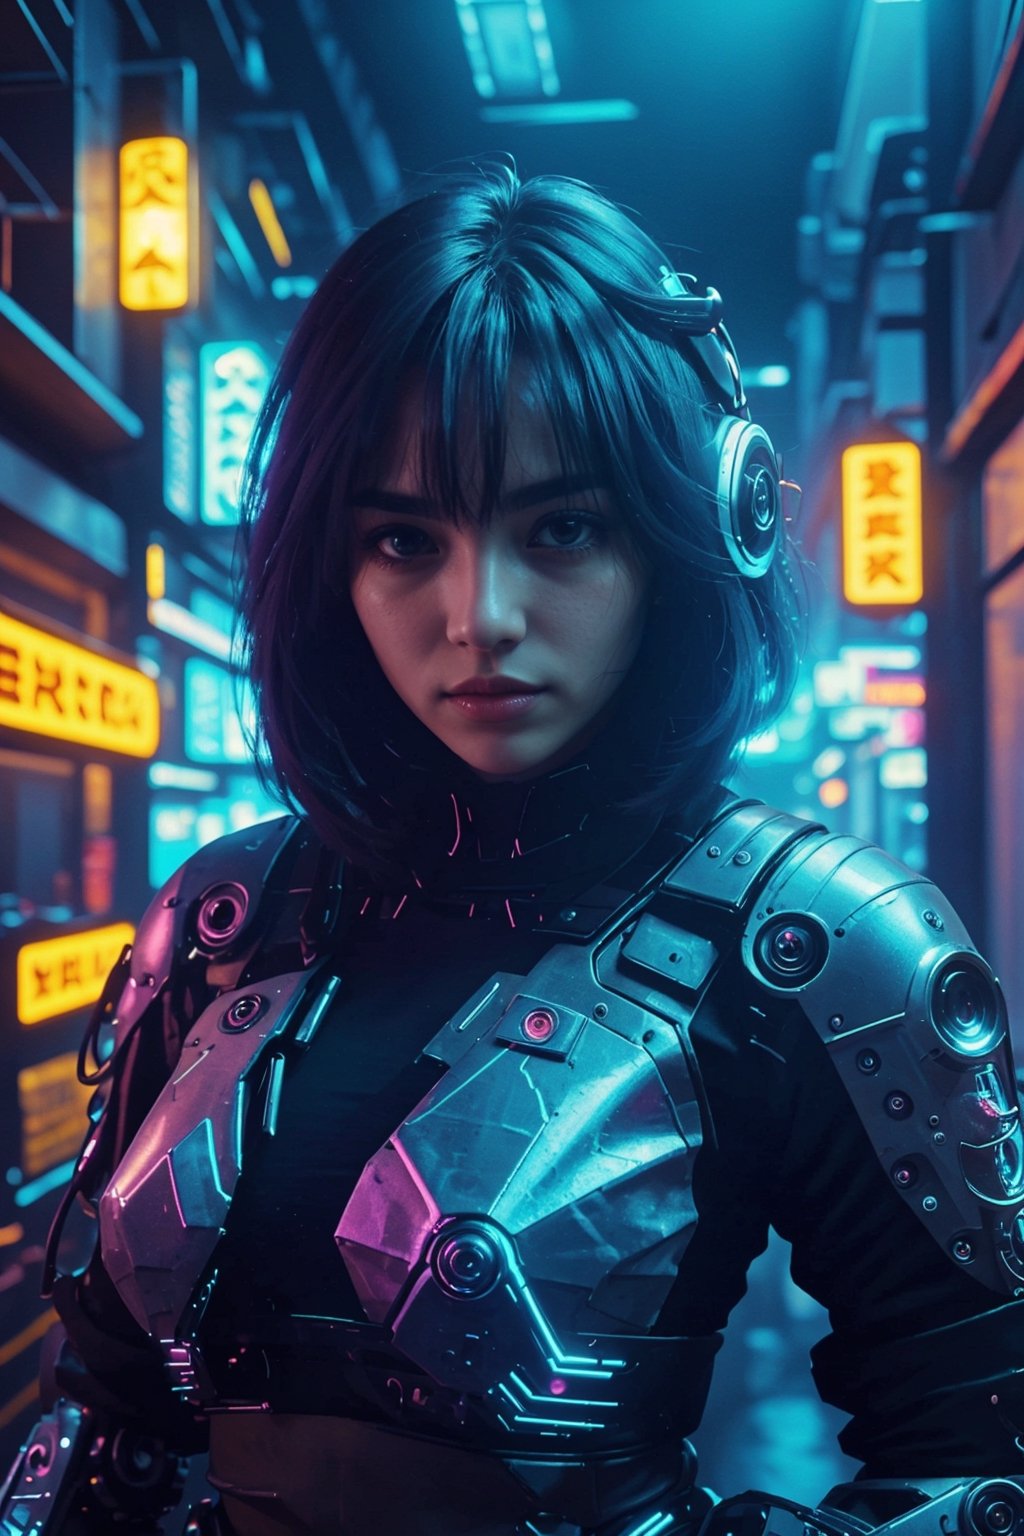 (Saree:1.1), (best quality, 4k, 8k, highres, masterpiece:1.2), ultra-detailed, physically-based rendering, professional, neon led light, vivid colors, bokeh, cyborg girl, made only glass, neon cables, gears, transparent body, mechanical details, glowing eyes, reflective surface, subtle reflections, ethereal, luminous, metallic highlights, sci-fi, futuristic, neon lights, blue and purple color palette, dynamic lighting,Mallugirl,Mecha body,,CyberpunkWorld,20 year old girl,bul4n,n4git4,tsumuri,kokoroaoshima,Fuj1